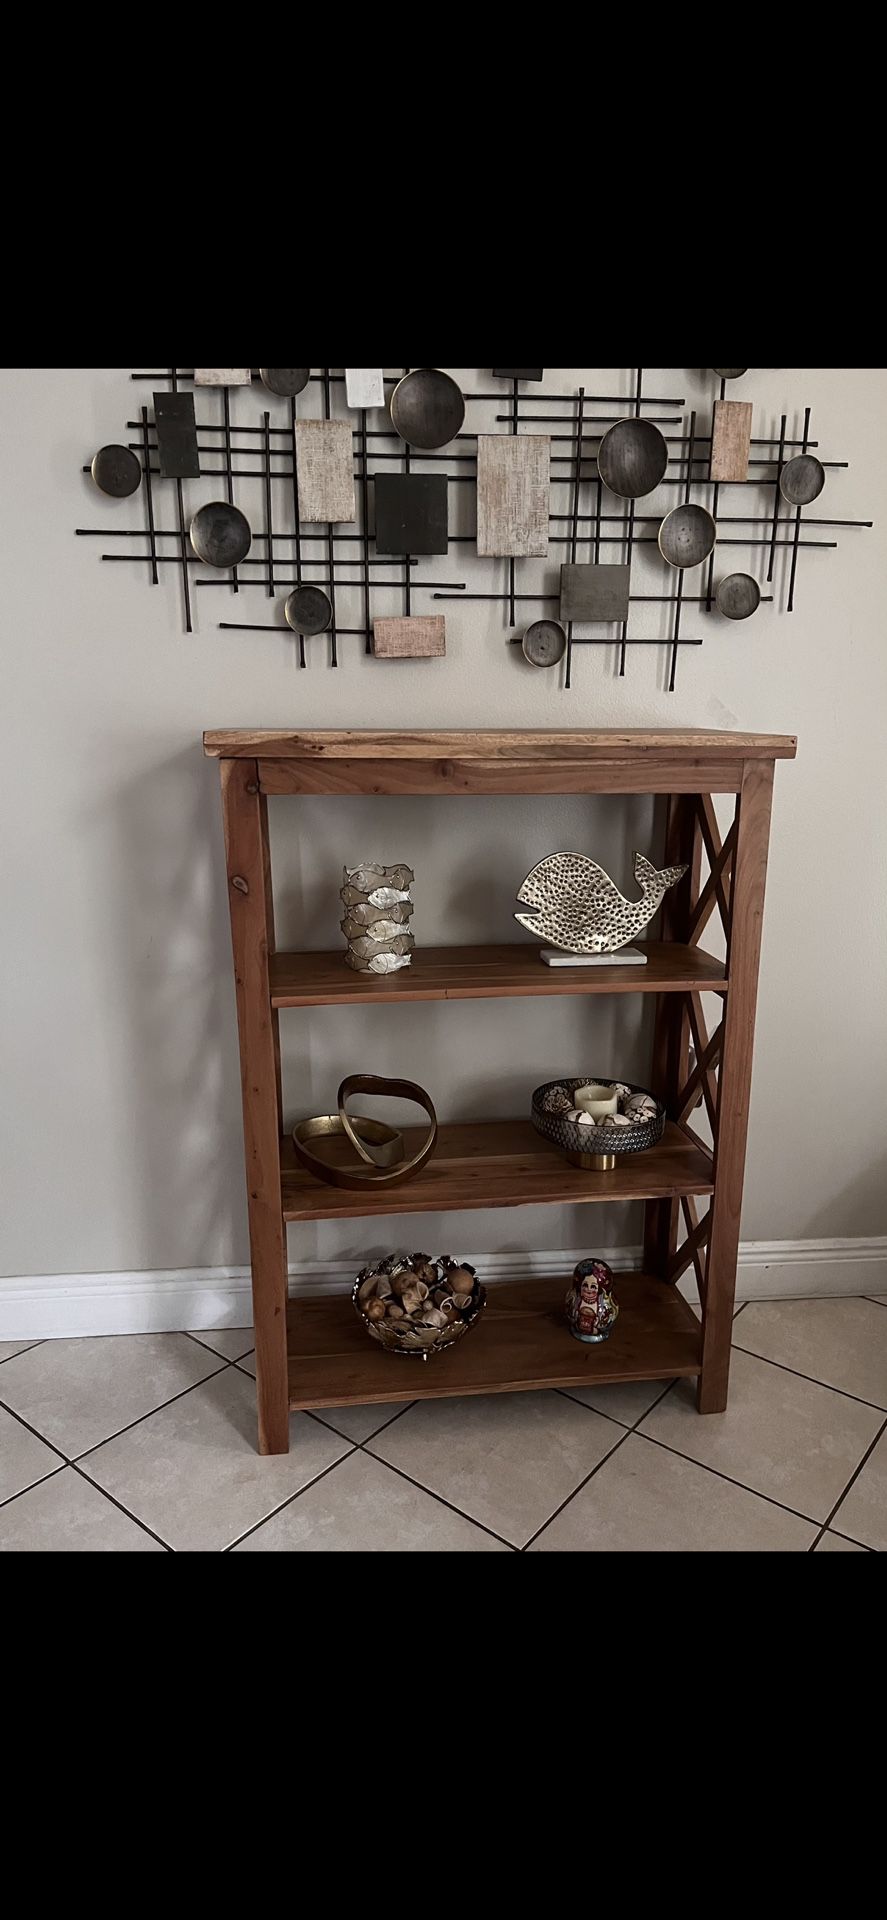 Wood Bookcase / Shelf  ( Decorations Not Included)